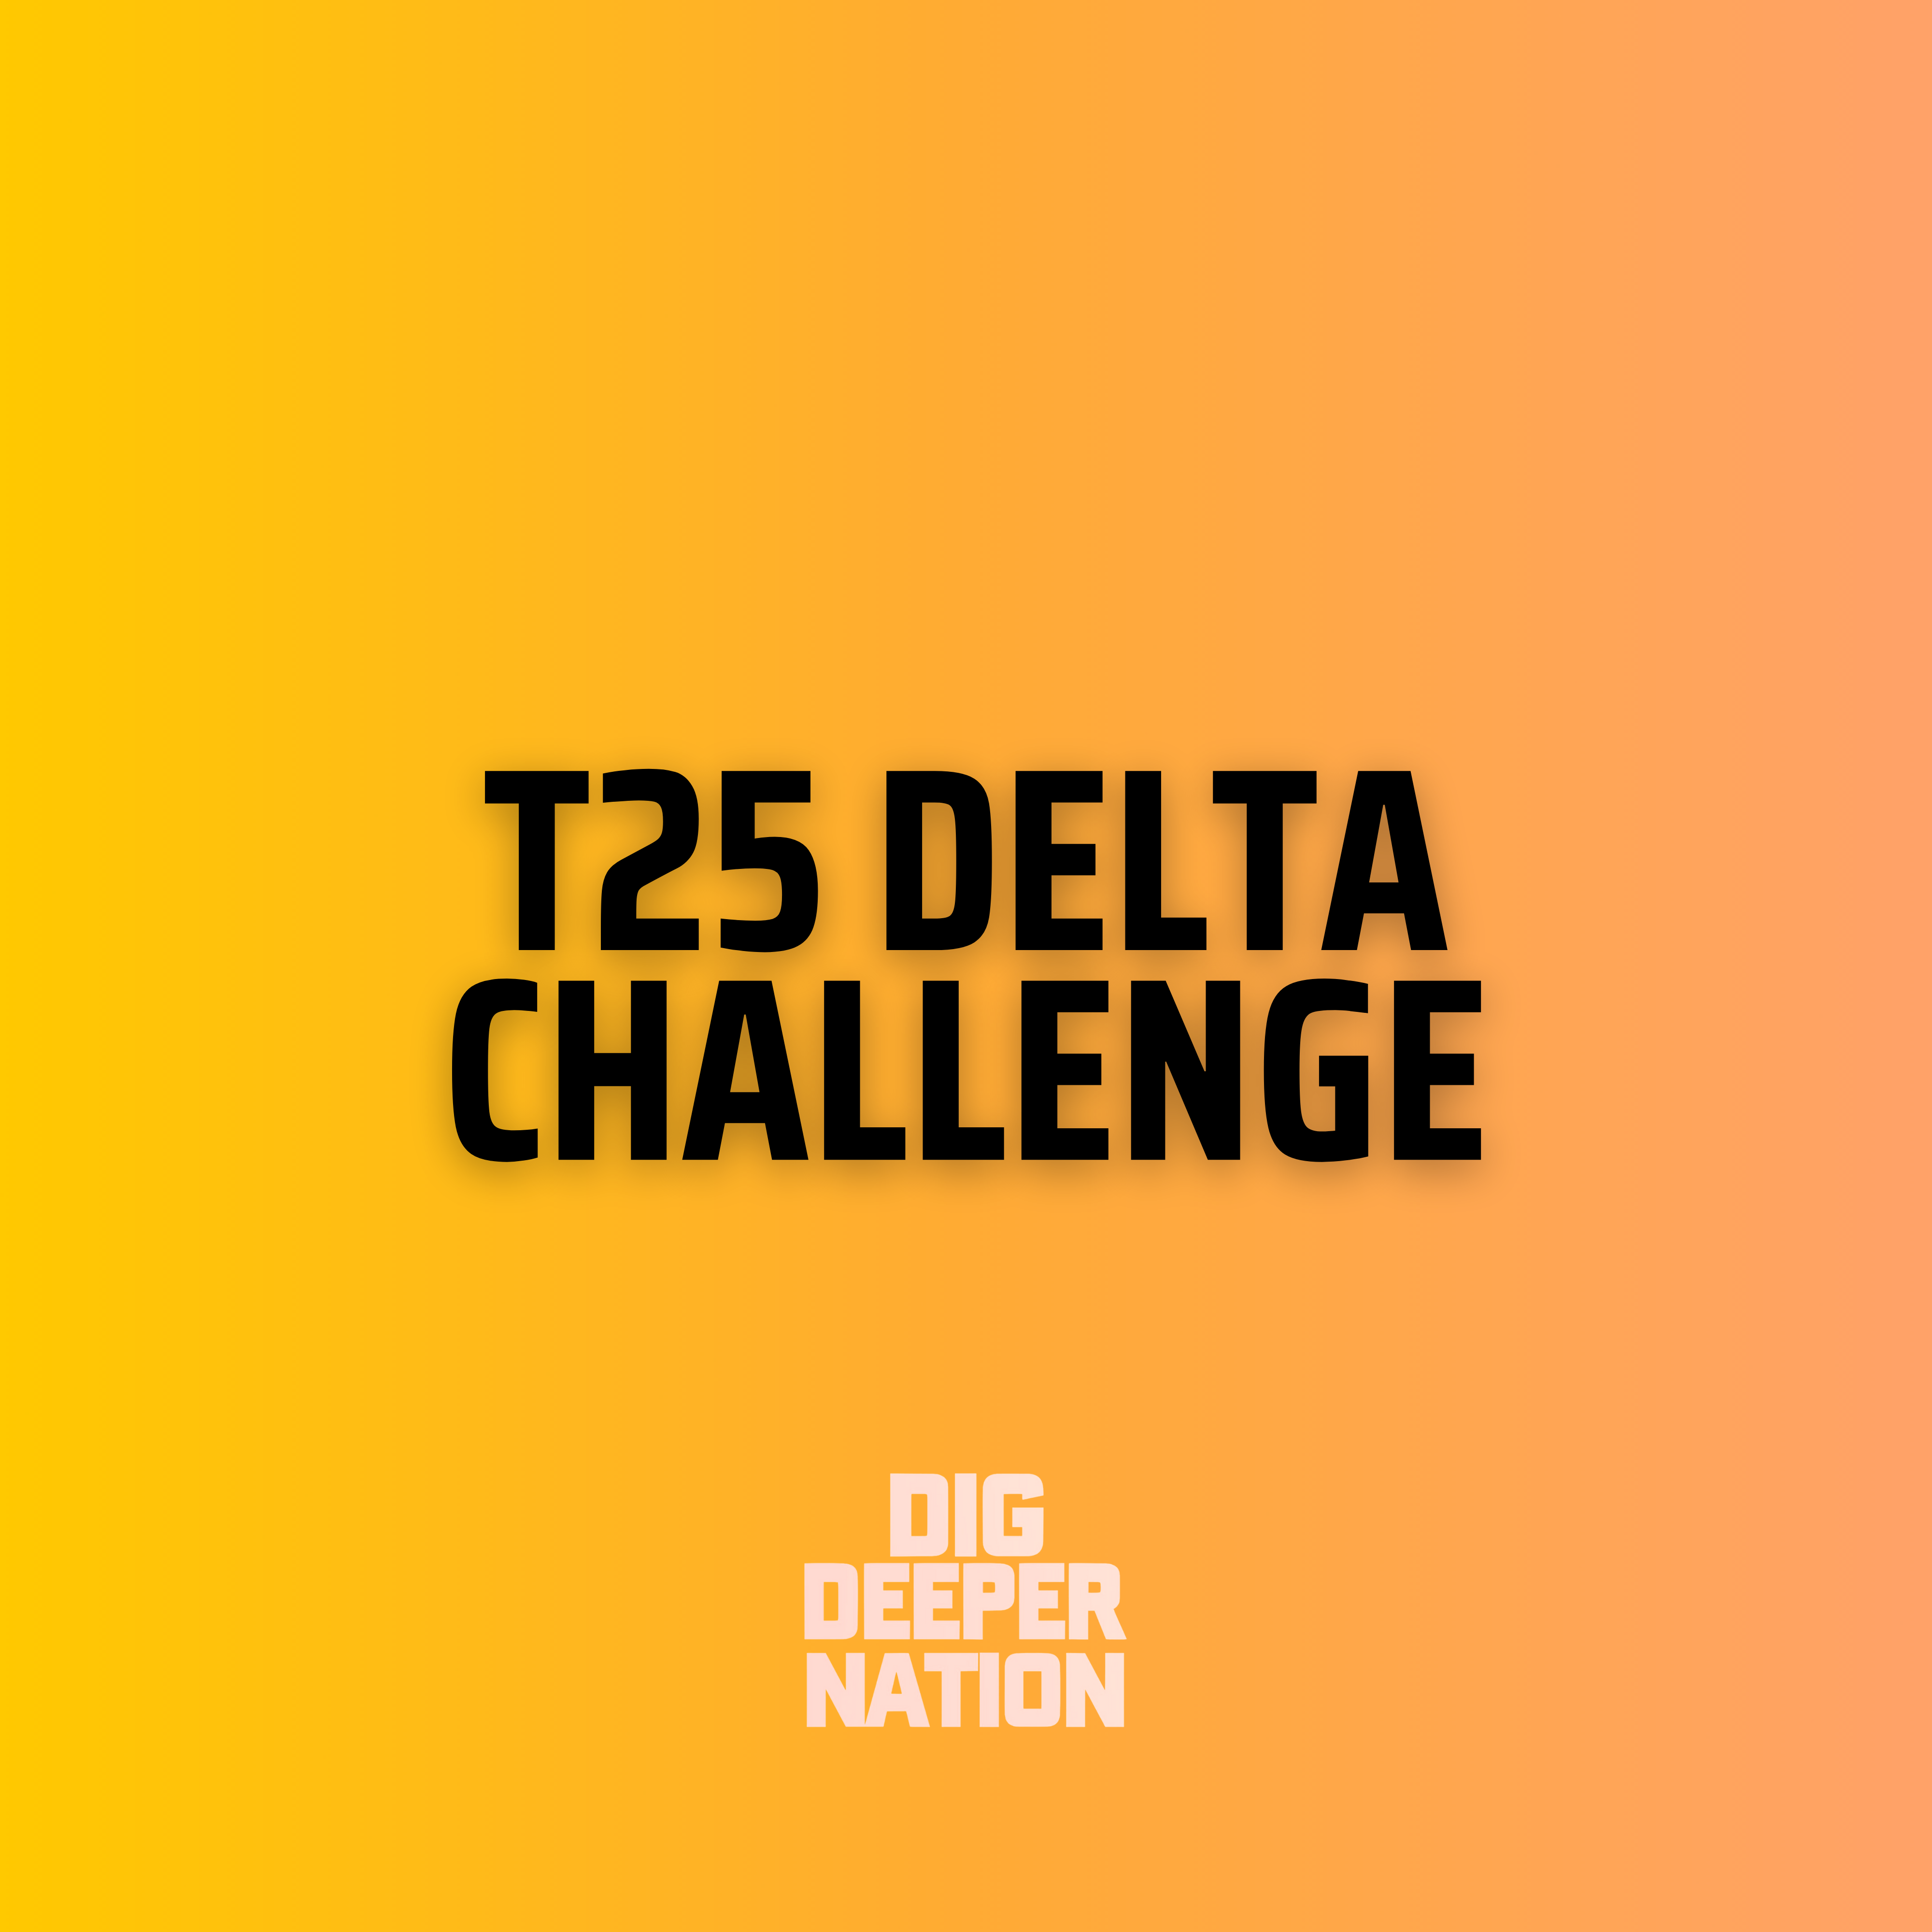 T25 Delta Challenge Thumbnail, Yellow and orange background, black text, white dig deeper nation logo